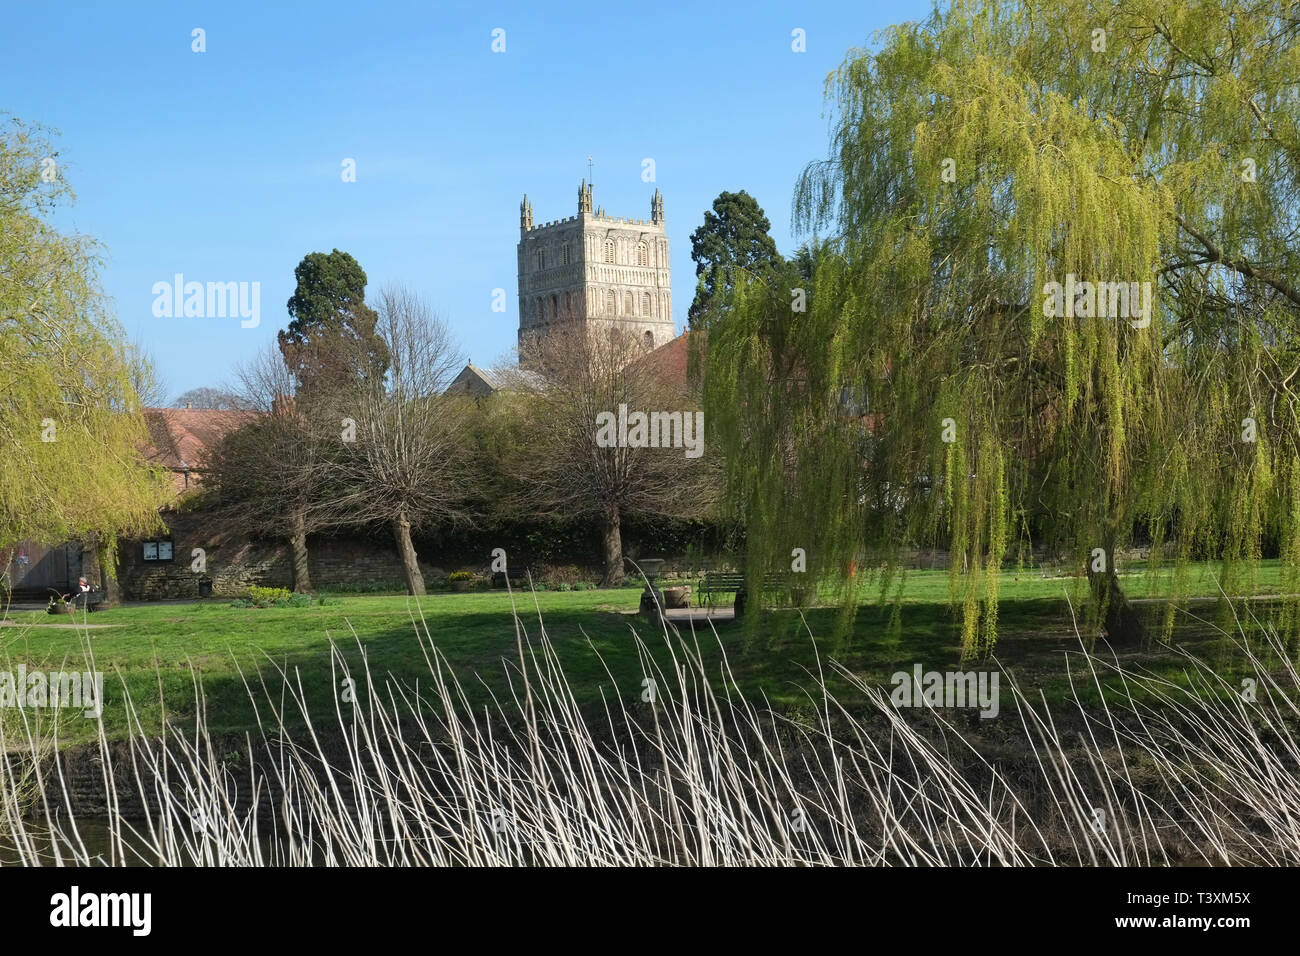 Tewkesbury Abbey tower - the largest Romanesque crossing tower in Europe. Seen from the banks of the River Avon. Tewkesbury, Gloucestershire, England Stock Photo